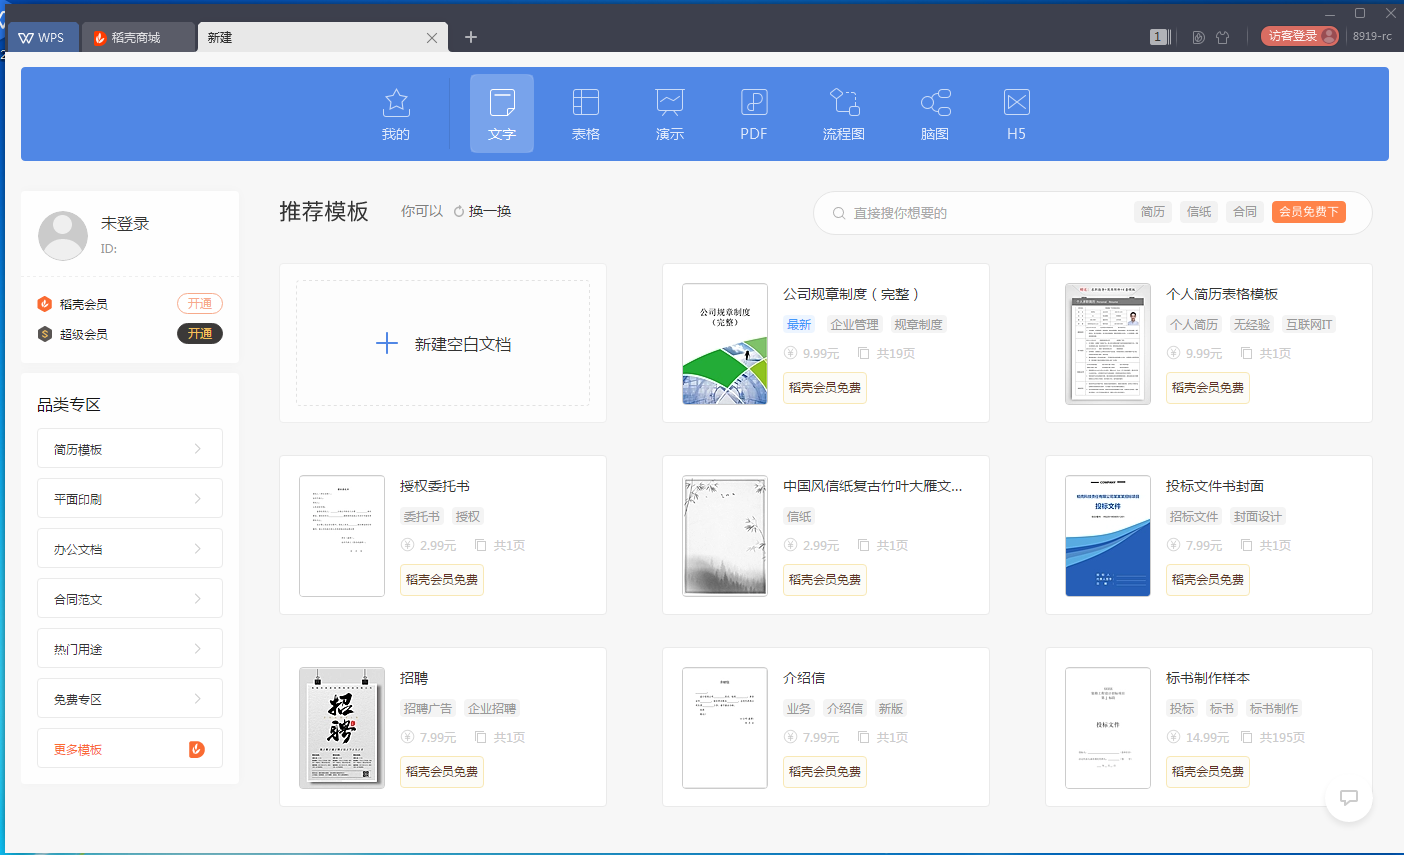 wps office for pc